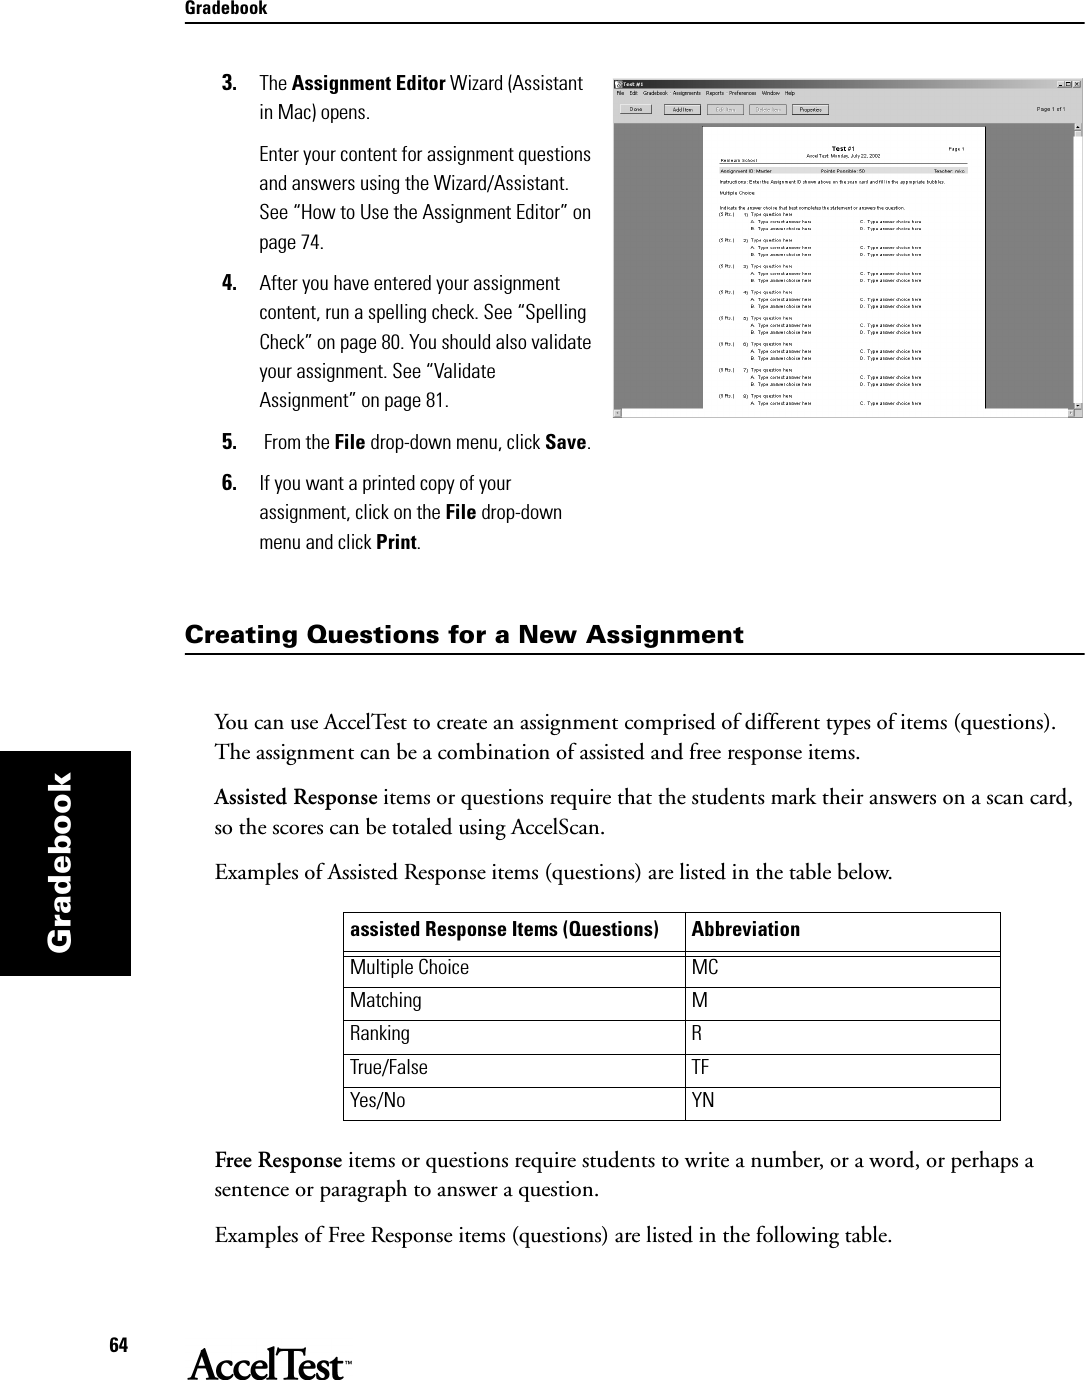 Gradebook64Gradebook3. The Assignment Editor Wizard (Assistant in Mac) opens. Enter your content for assignment questions and answers using the Wizard/Assistant. See “How to Use the Assignment Editor” on page 74.4. After you have entered your assignment content, run a spelling check. See “Spelling Check” on page 80. You should also validate your assignment. See “Validate Assignment” on page 81.5.  From the File drop-down menu, click Save. 6. If you want a printed copy of your assignment, click on the File drop-down menu and click Print.Creating Questions for a New AssignmentYou can use AccelTest to create an assignment comprised of different types of items (questions). The assignment can be a combination of assisted and free response items.Assisted Response items or questions require that the students mark their answers on a scan card, so the scores can be totaled using AccelScan. Examples of Assisted Response items (questions) are listed in the table below.Free Response items or questions require students to write a number, or a word, or perhaps a sentence or paragraph to answer a question. Examples of Free Response items (questions) are listed in the following table.assisted Response Items (Questions) AbbreviationMultiple Choice MCMatching MRanking RTrue/False TFYes/No YN